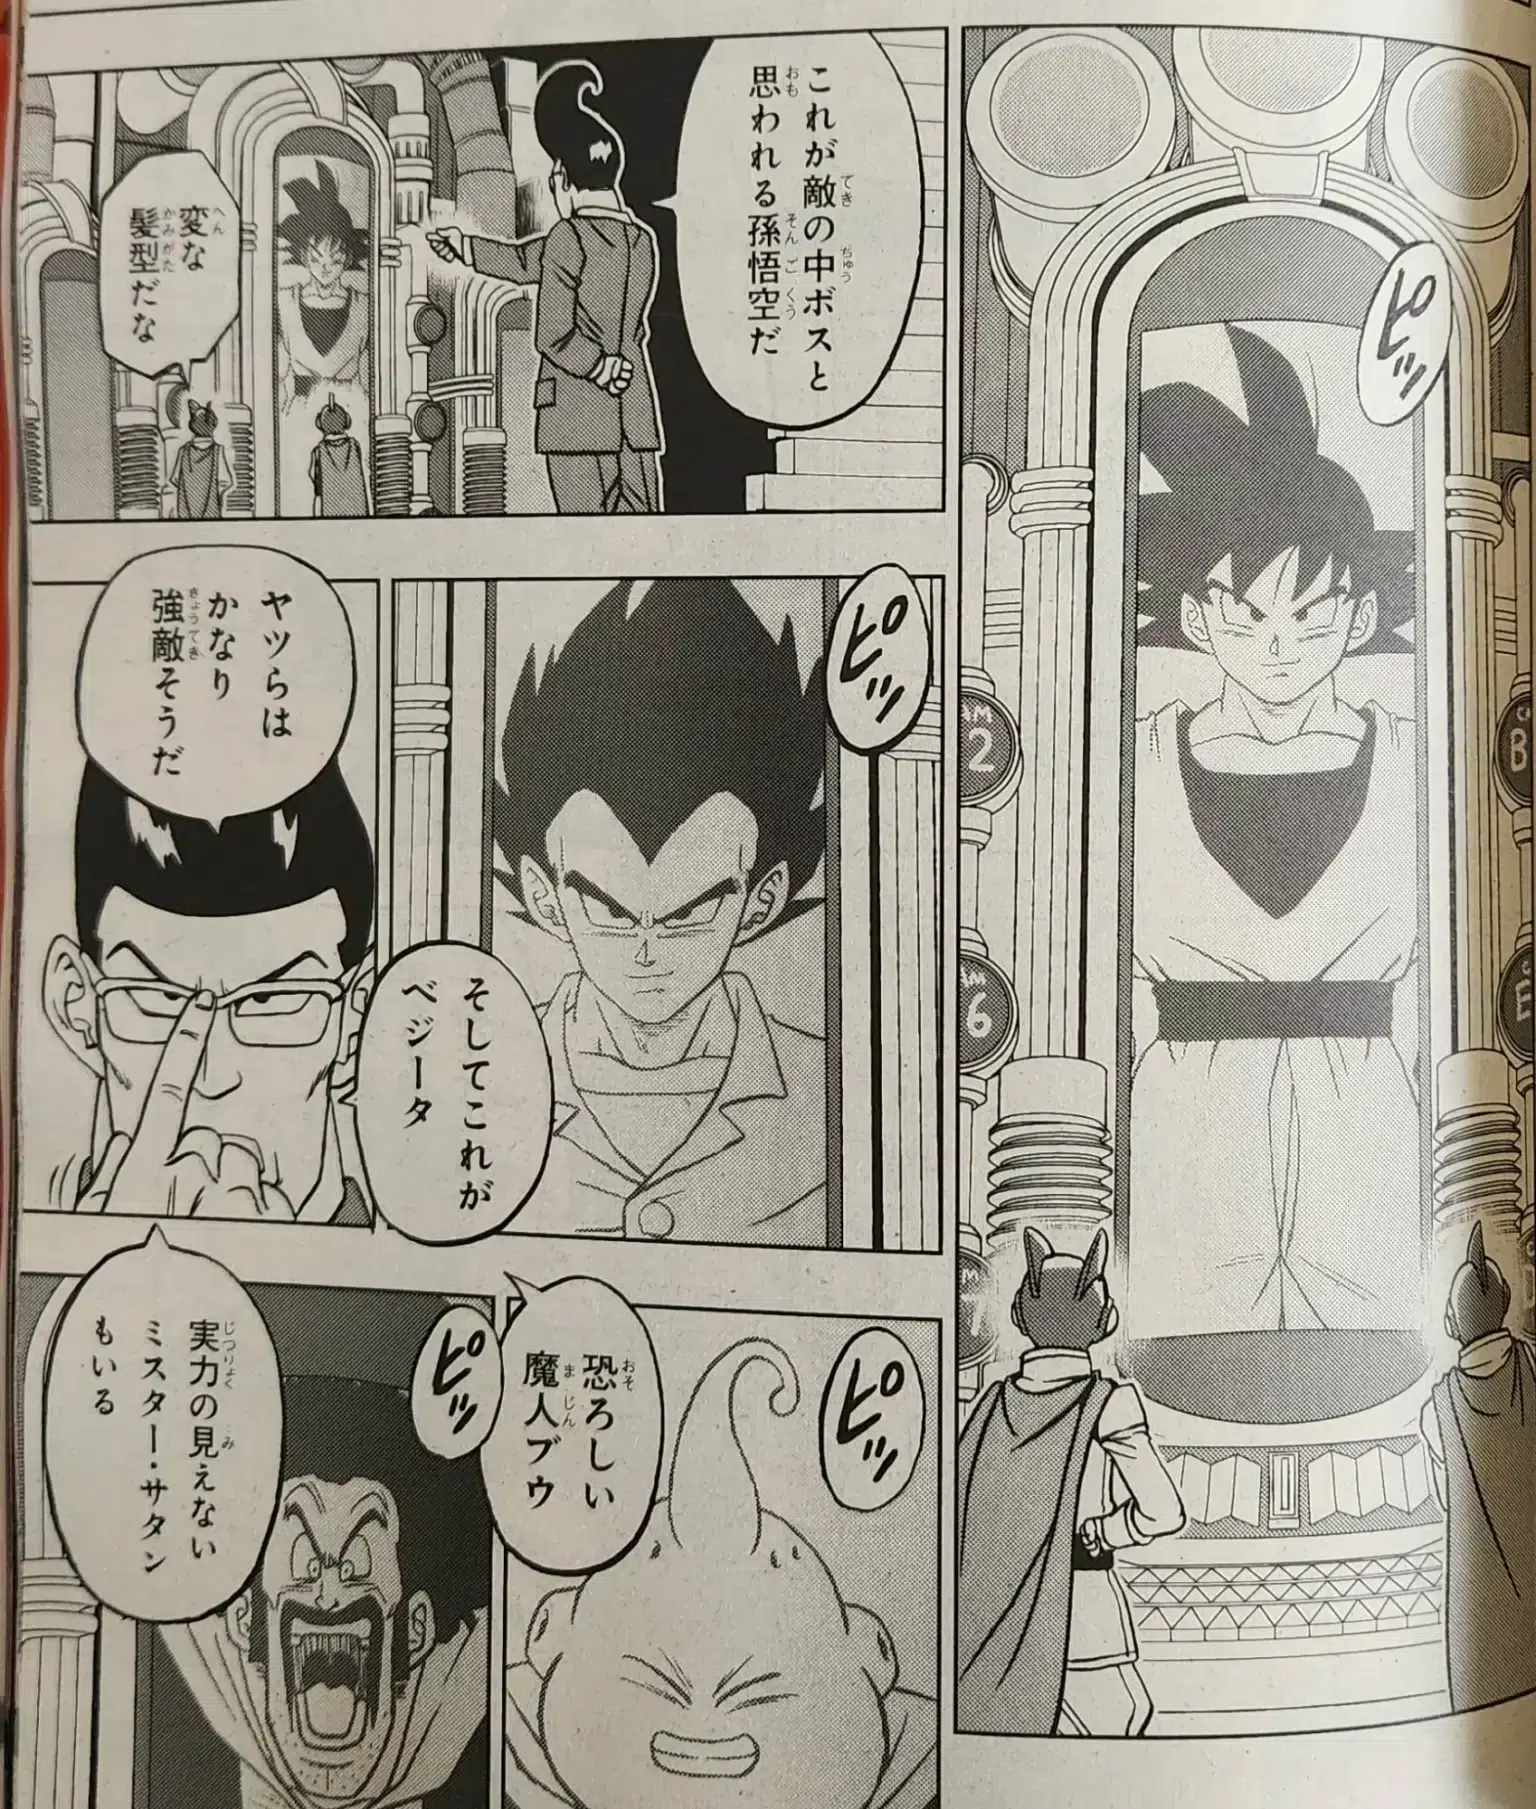 dbs capitulo 92 image 3